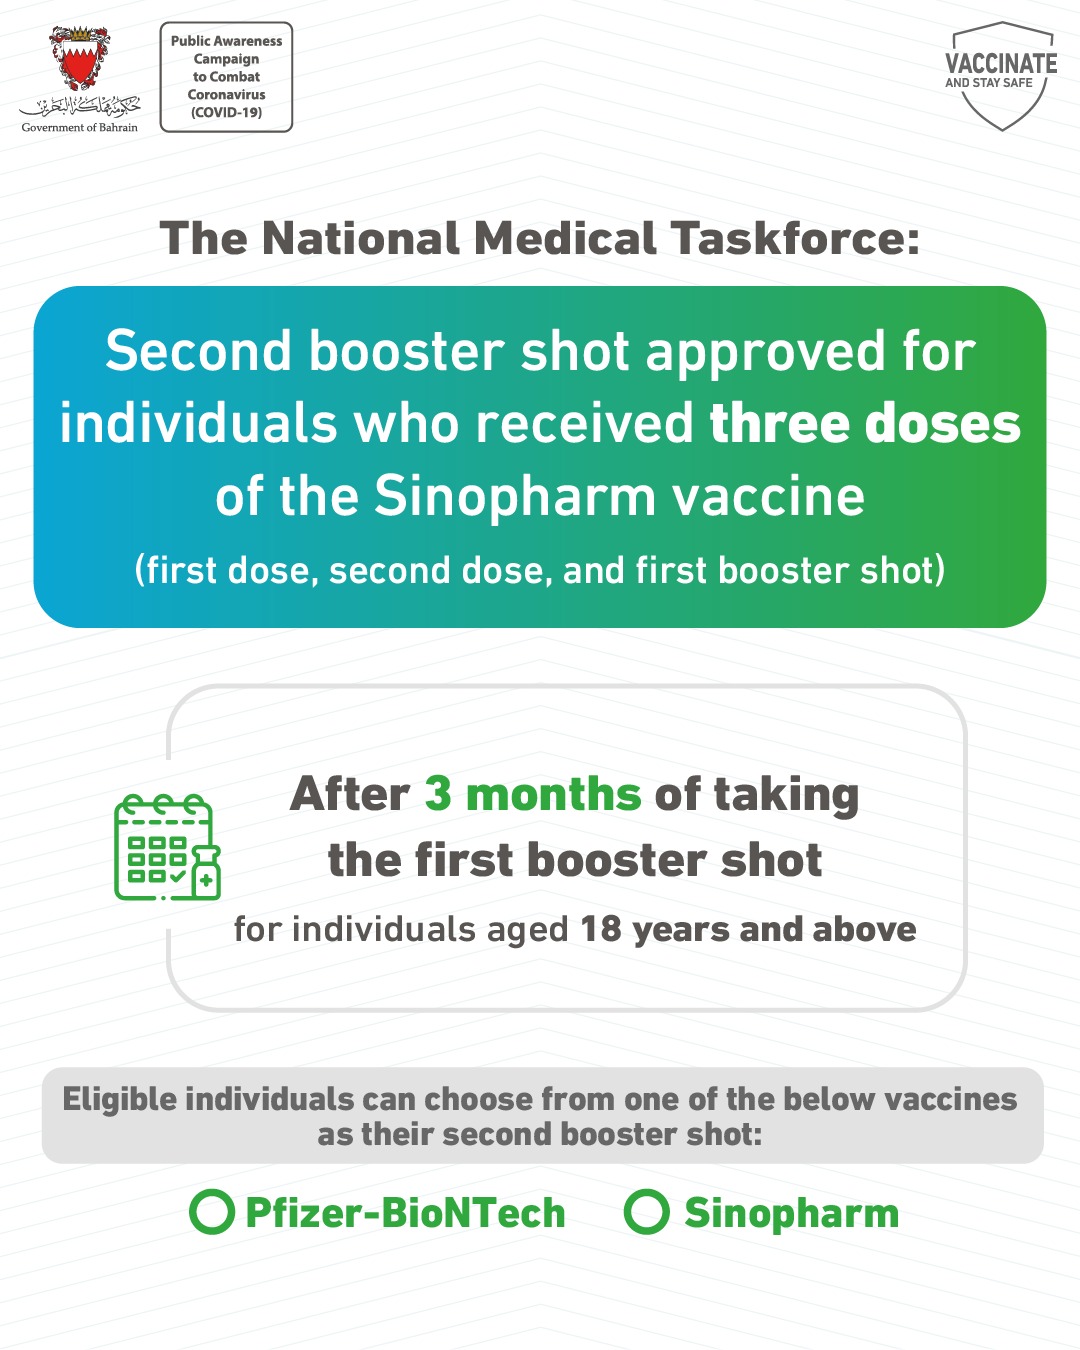 Second booster shot approved for individuals who received three doses of the Sinopharm vaccine: 23 December 2021